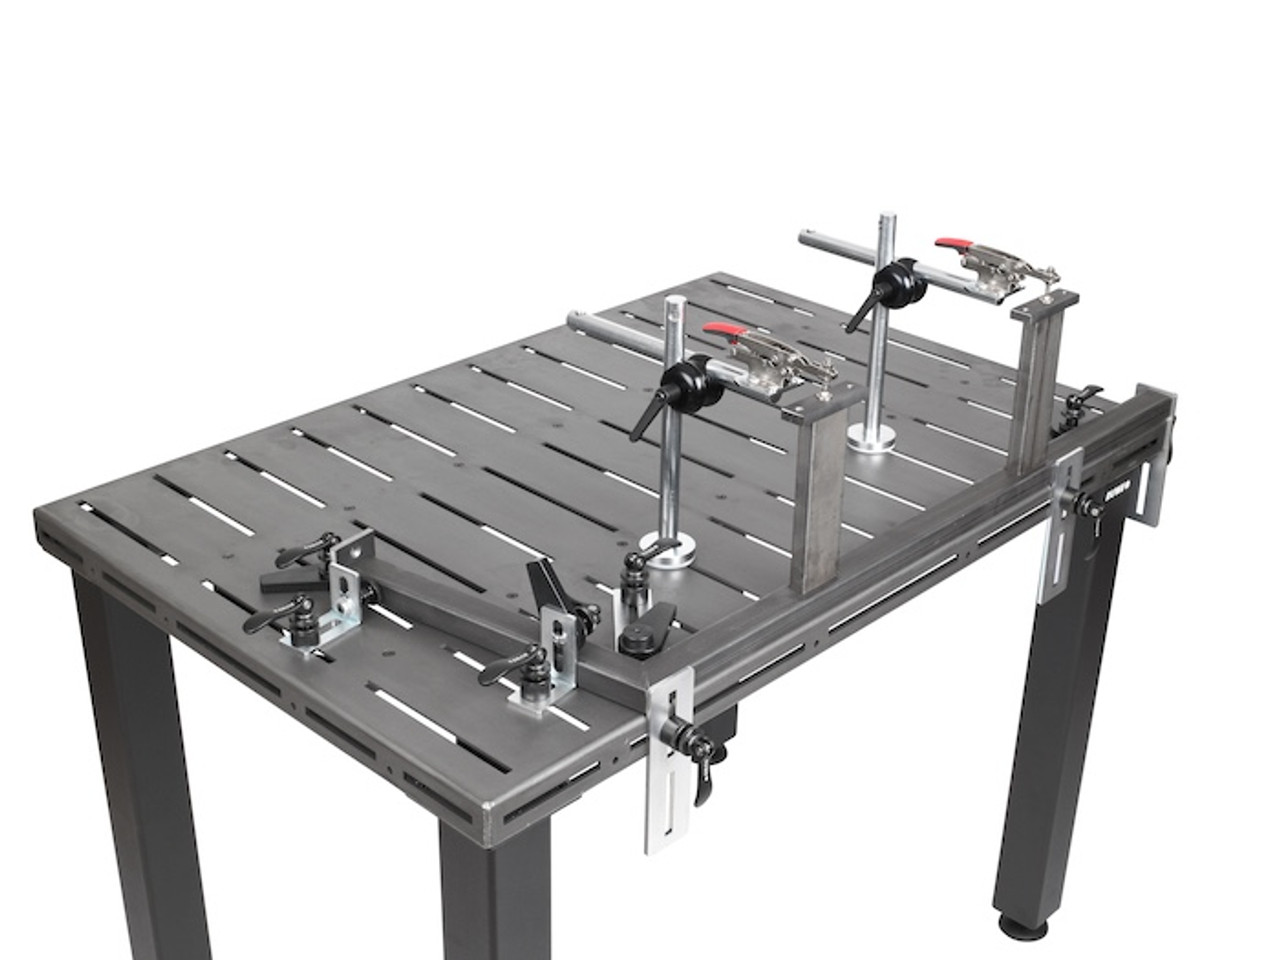 Buy Online 4mm Phosphated Top for Welding Table from RUWI with 10mm Groove for the Welding Industry and Installers in Perth, Sydney and Brisbane